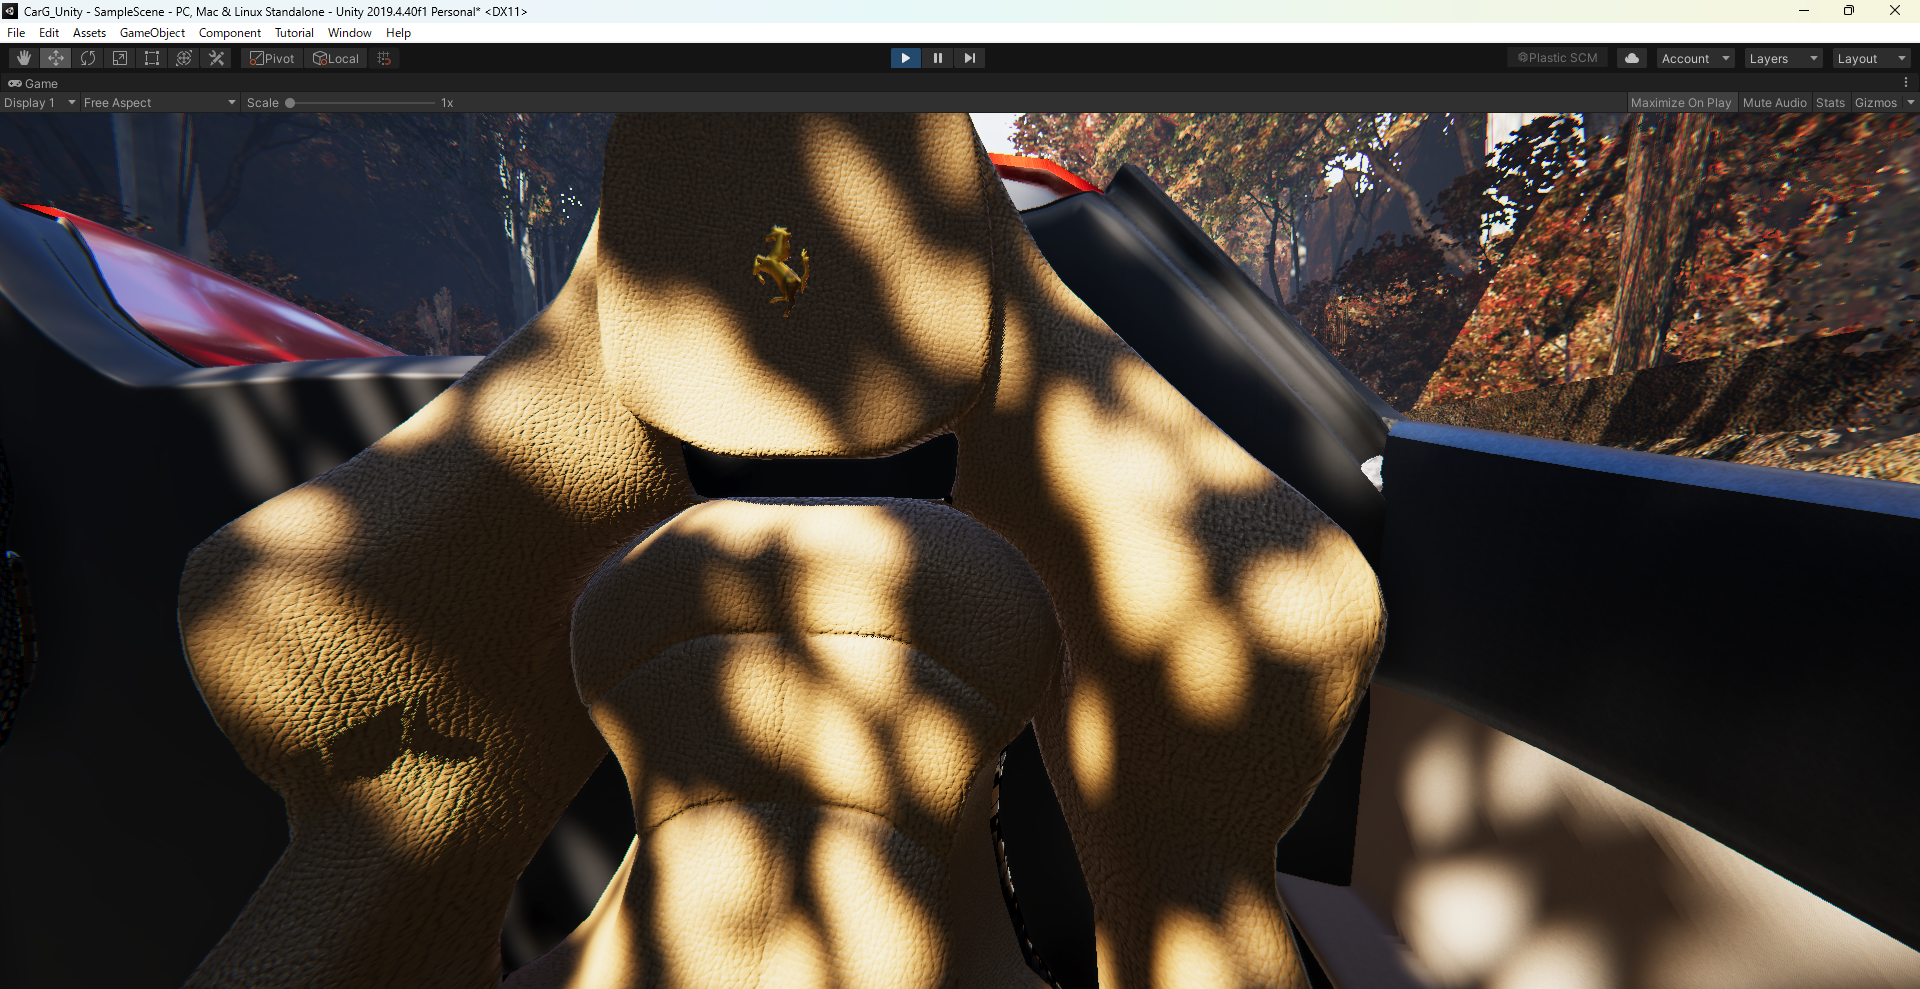 CarG_Unity - SampleScene - PC, Mac & Linux Standalone - Unity 2019.4.40f1 Personal_ DX11 2022_12_12 23_15_19.png